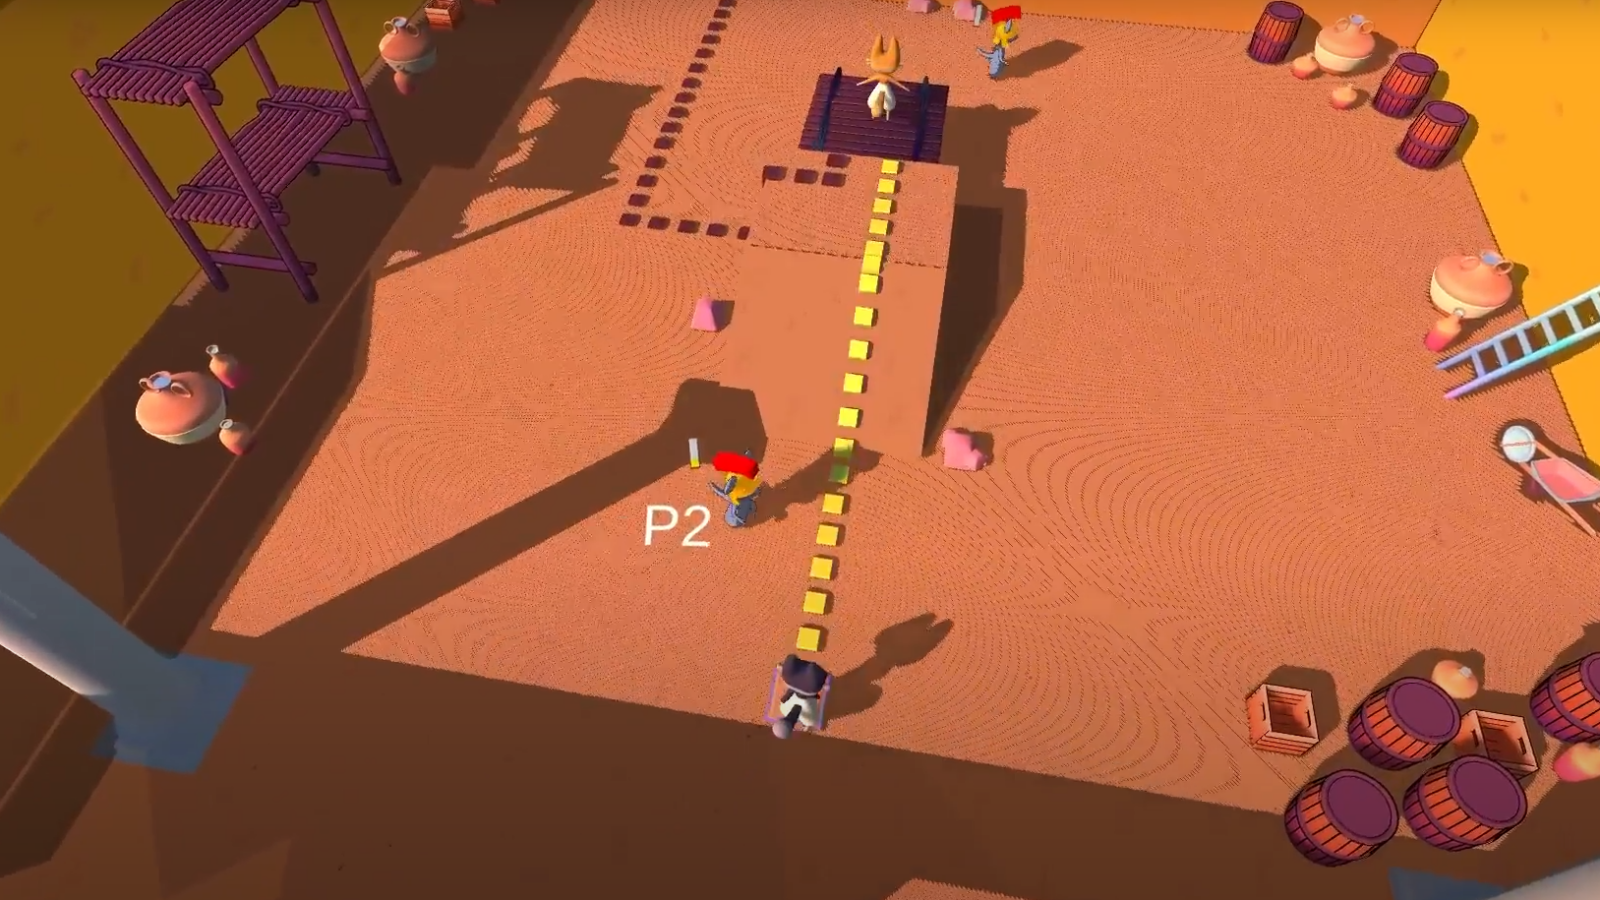 A two-player networked cooperative stealth puzzler.